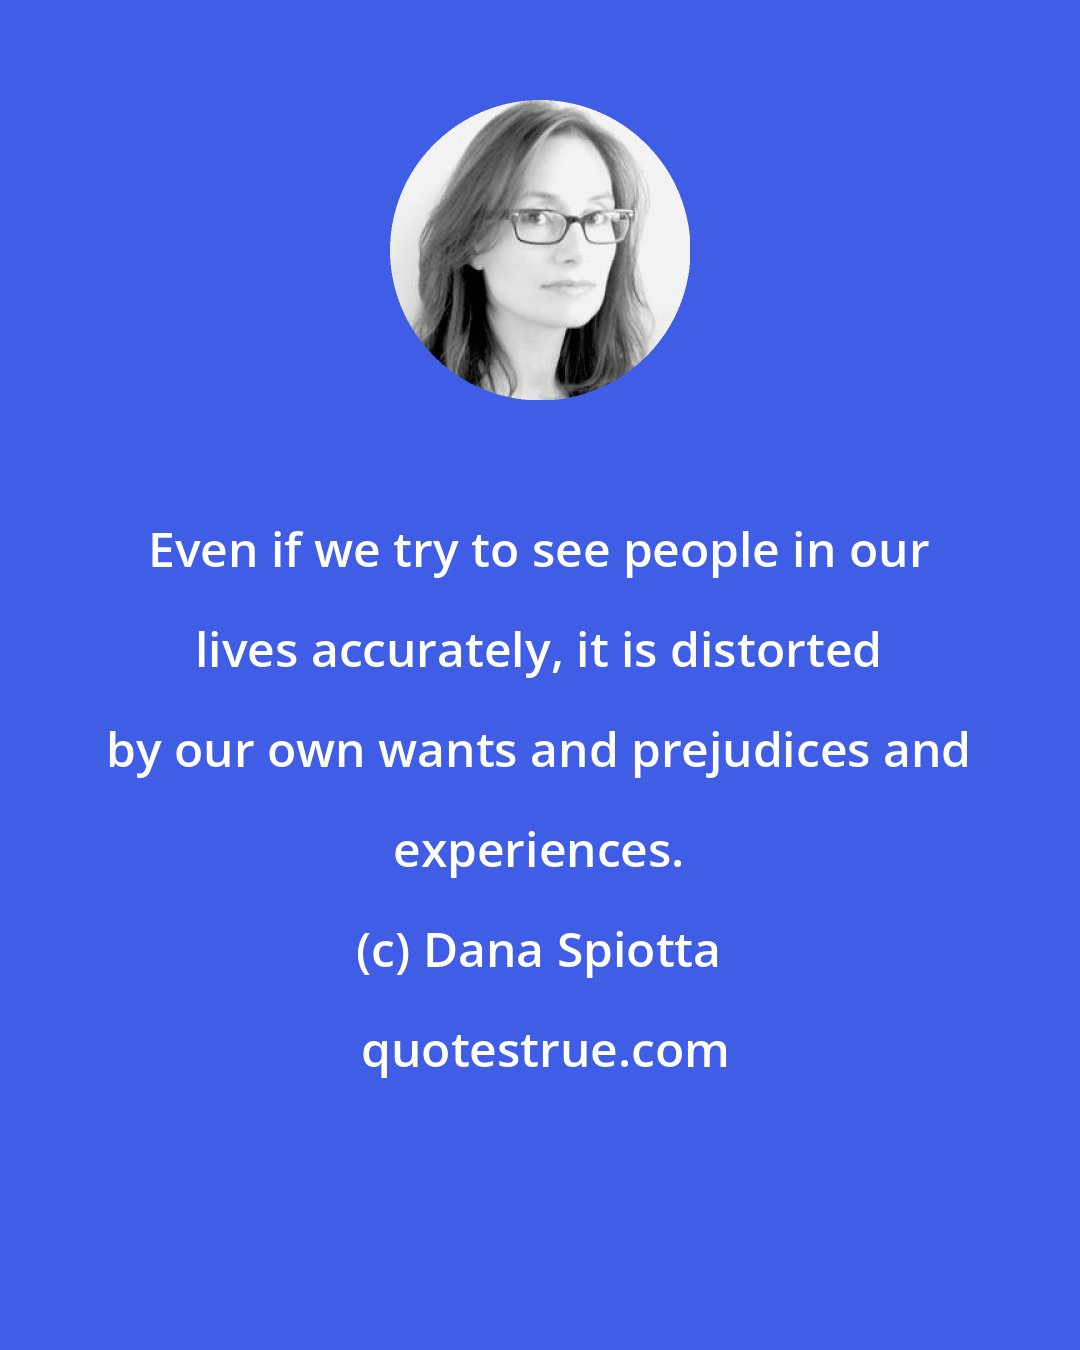 Dana Spiotta: Even if we try to see people in our lives accurately, it is distorted by our own wants and prejudices and experiences.